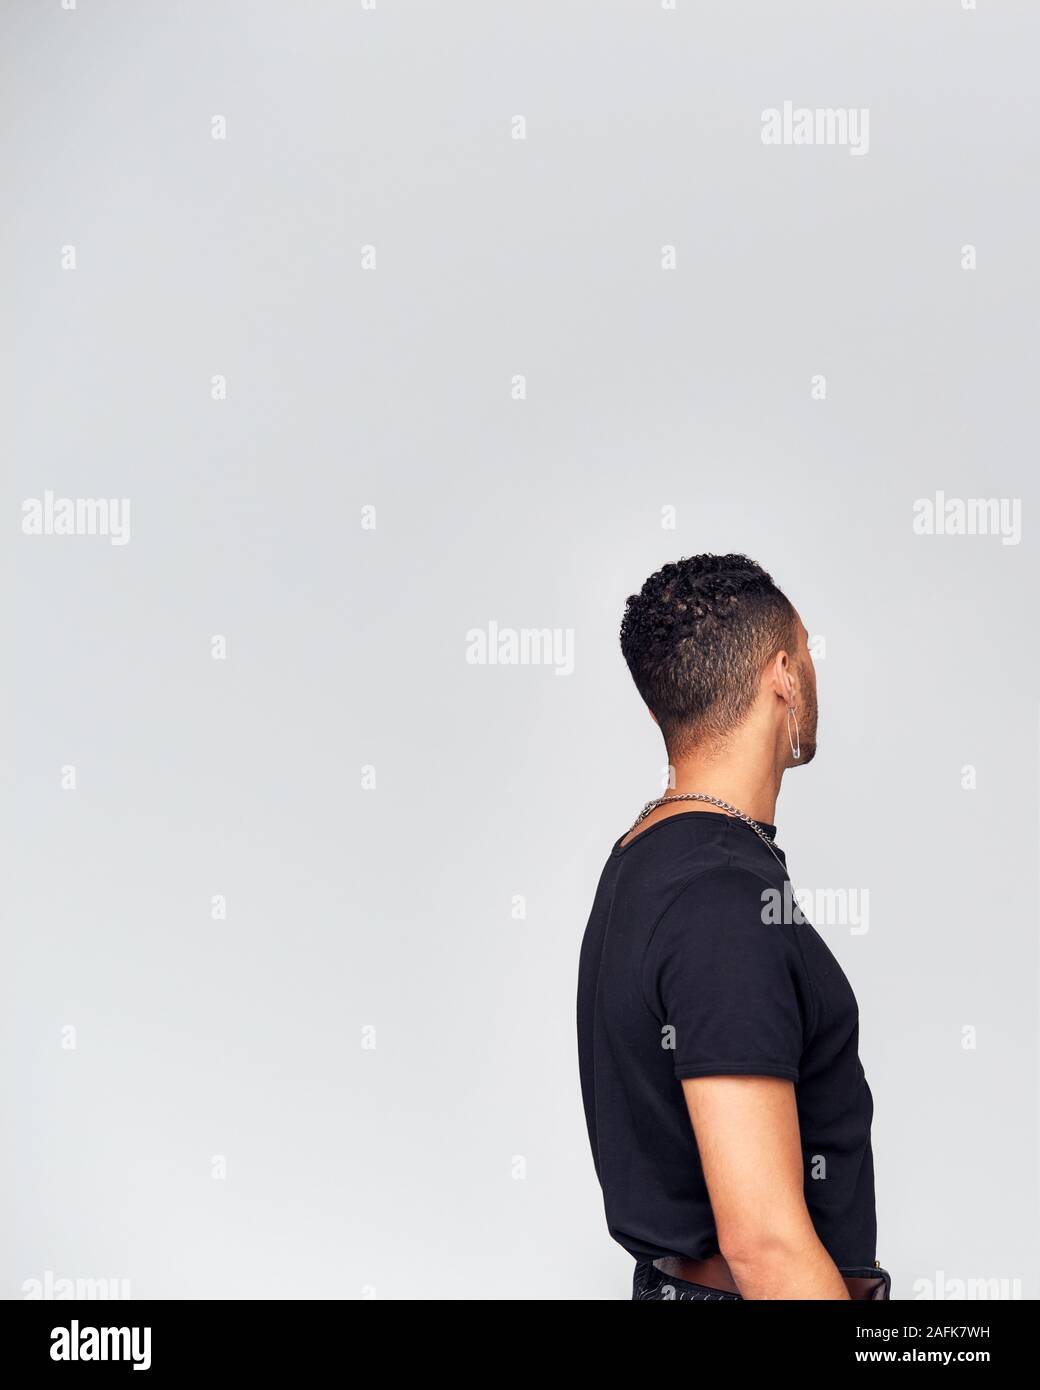 Rear View Of Young Man Looking Away From Camera In Studio Stock Photo